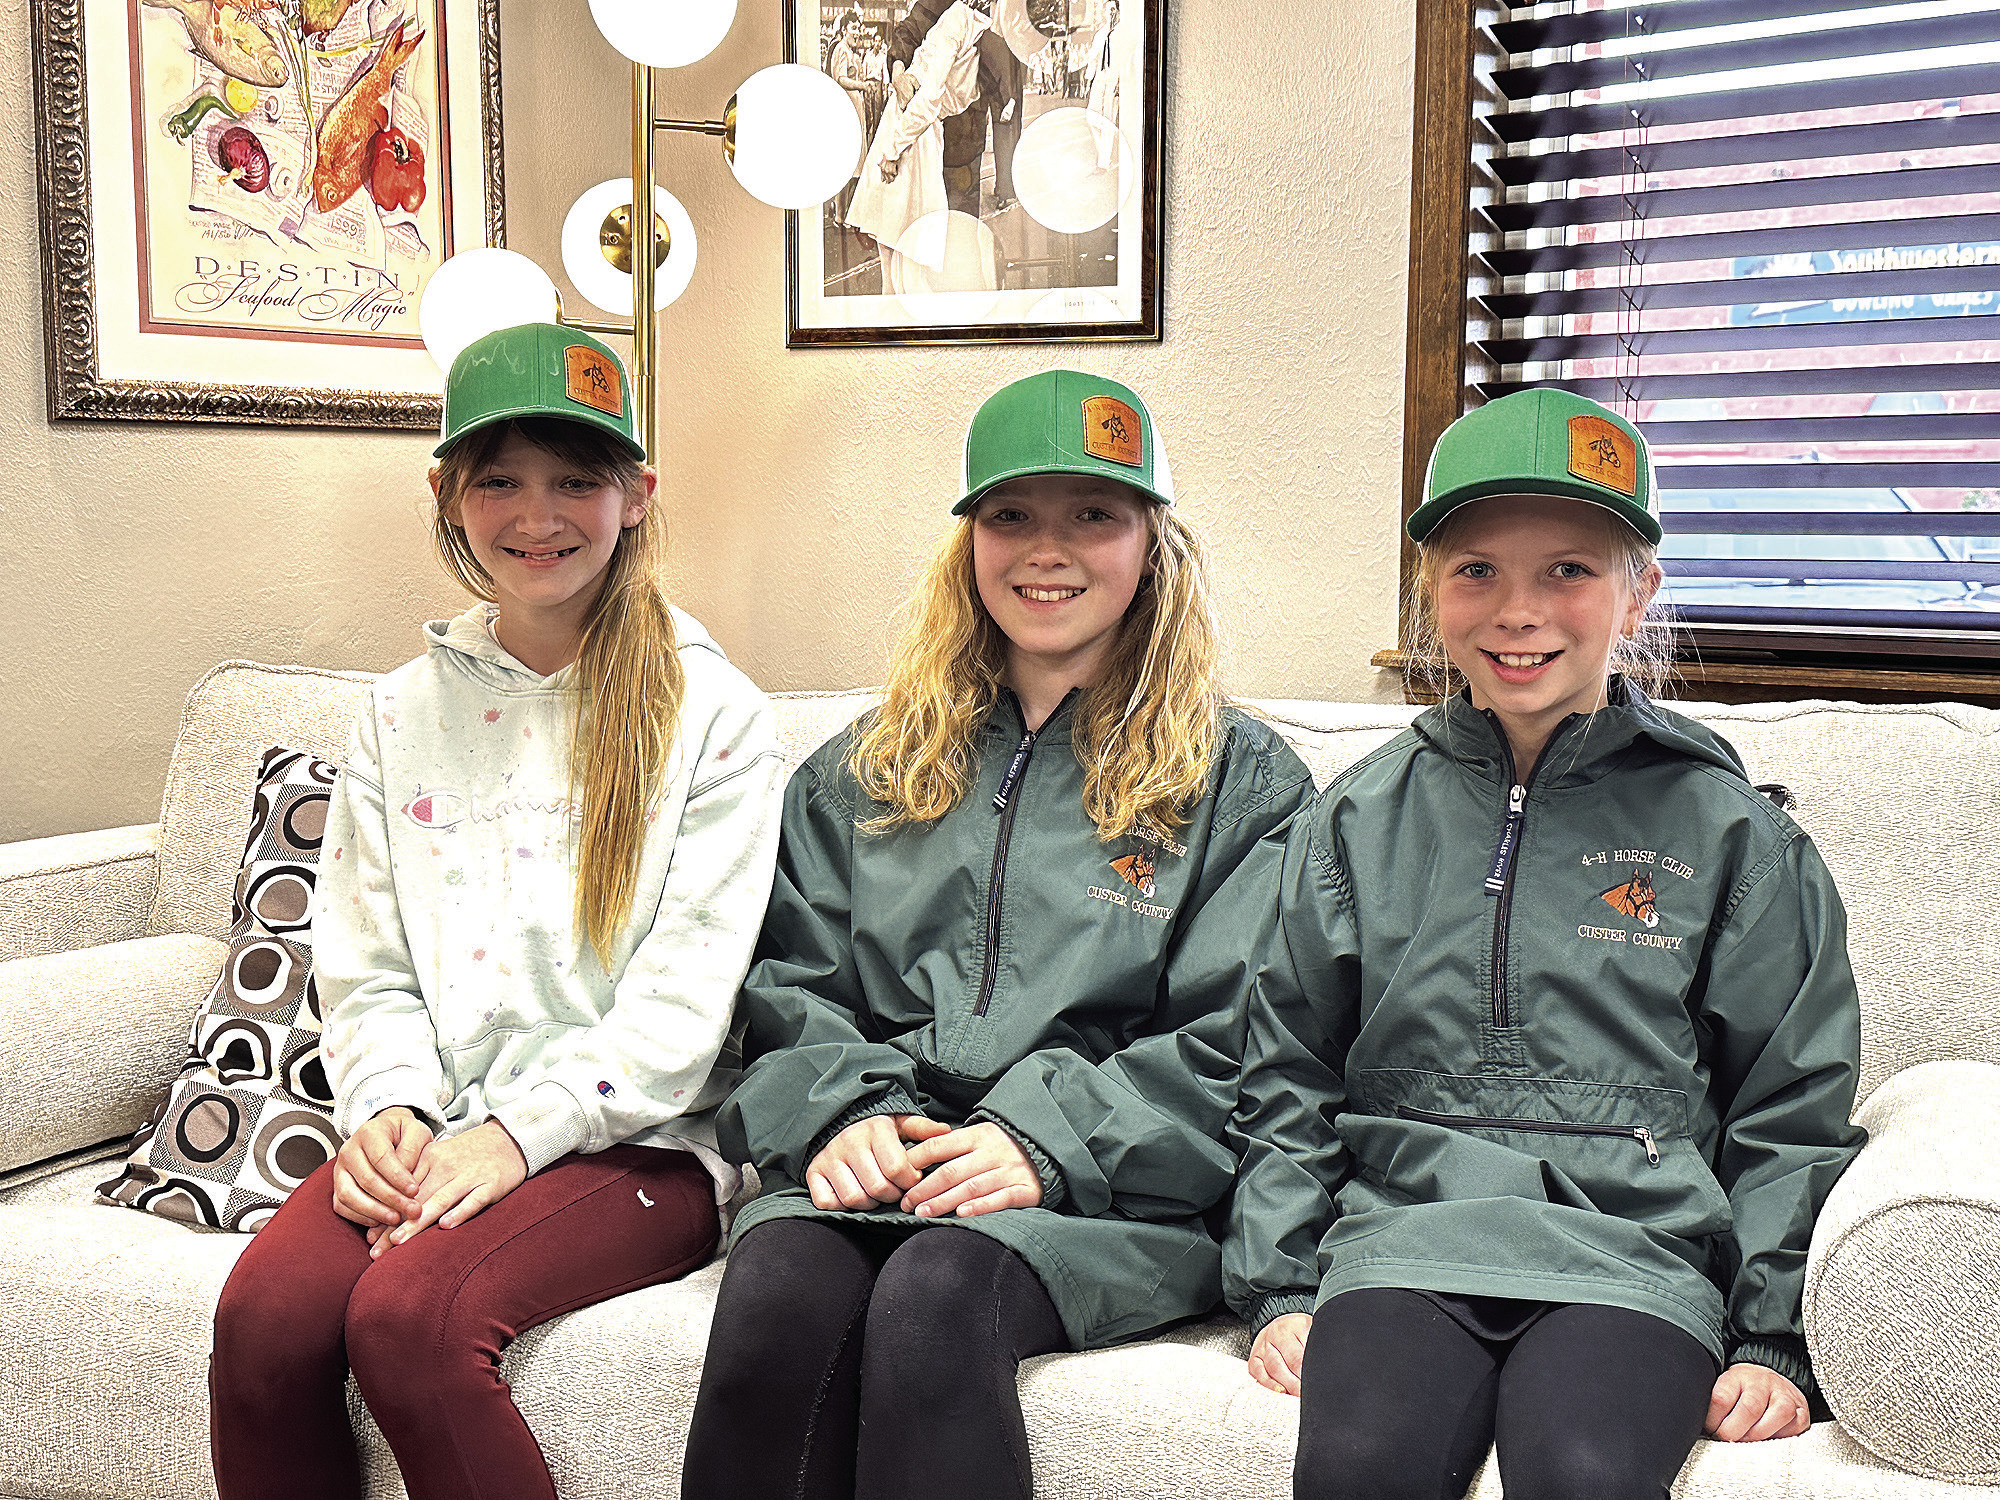 Custer County 4H Horse Club members from left Vanna Behne, Lexy Stutzman and Evey Ellis stopped by the Weatherford Daily News office to tell about their fundraiser for the club where proceeds help support the horse show events. Anyone who would like to help support the cause can call Cindy Behne at (870) 882-9881.